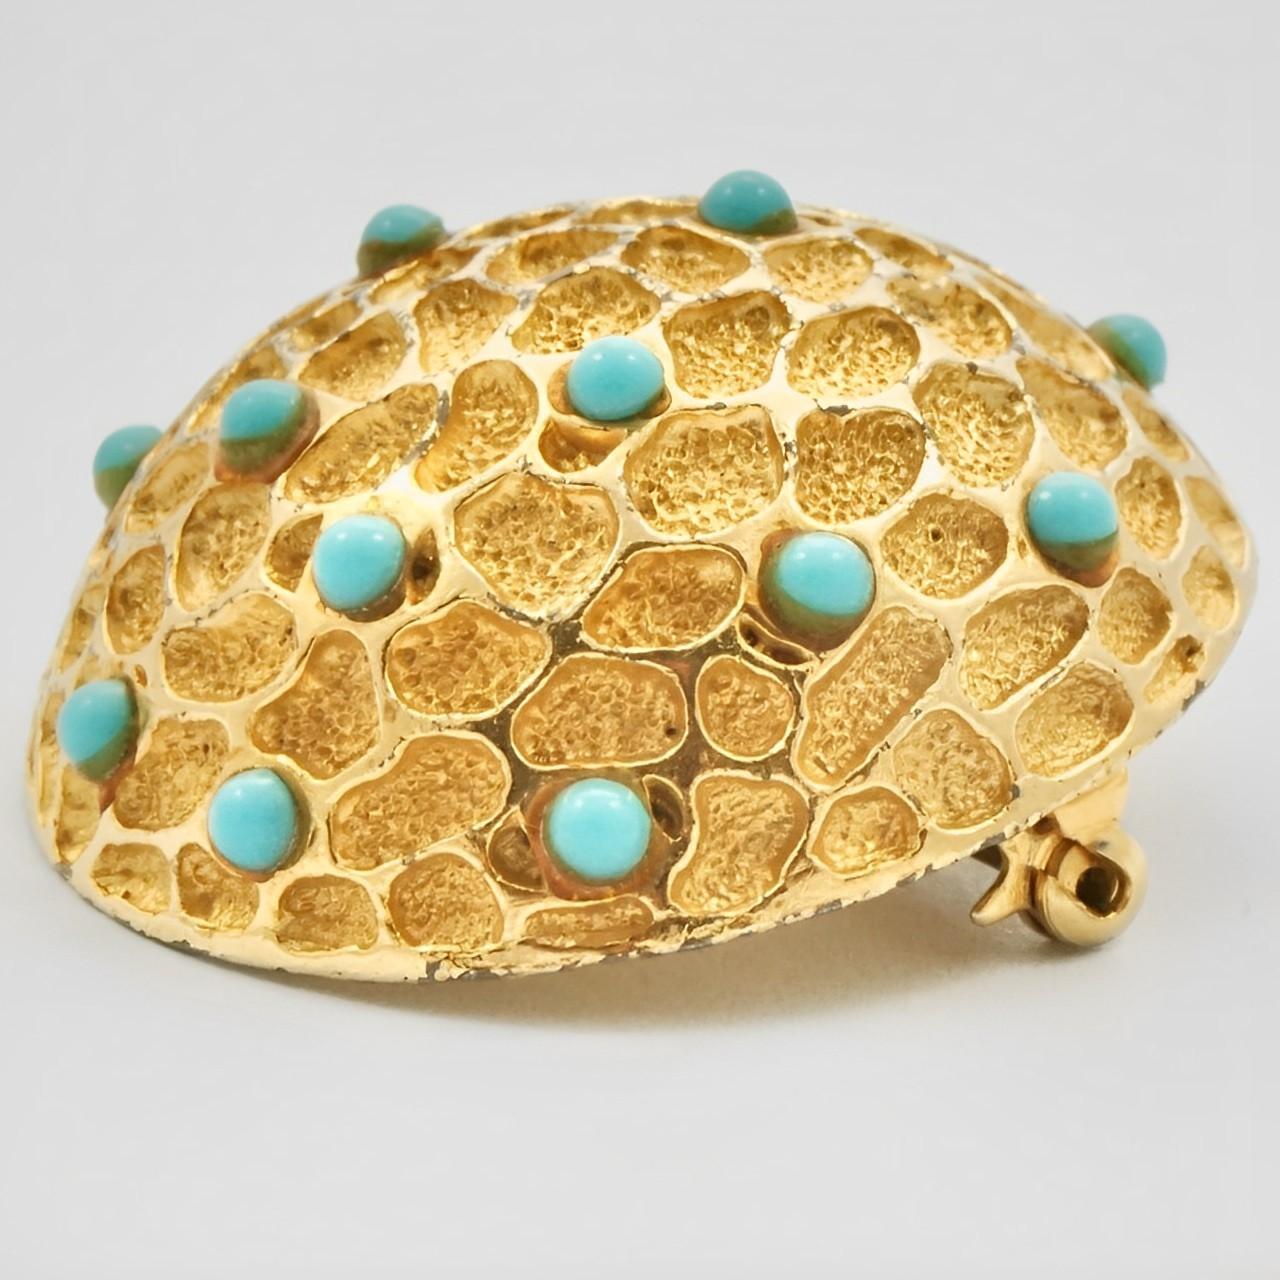 Textured Gold Plated Faux Turquoise Glass Dome Brooch circa 1970s In Good Condition For Sale In London, GB